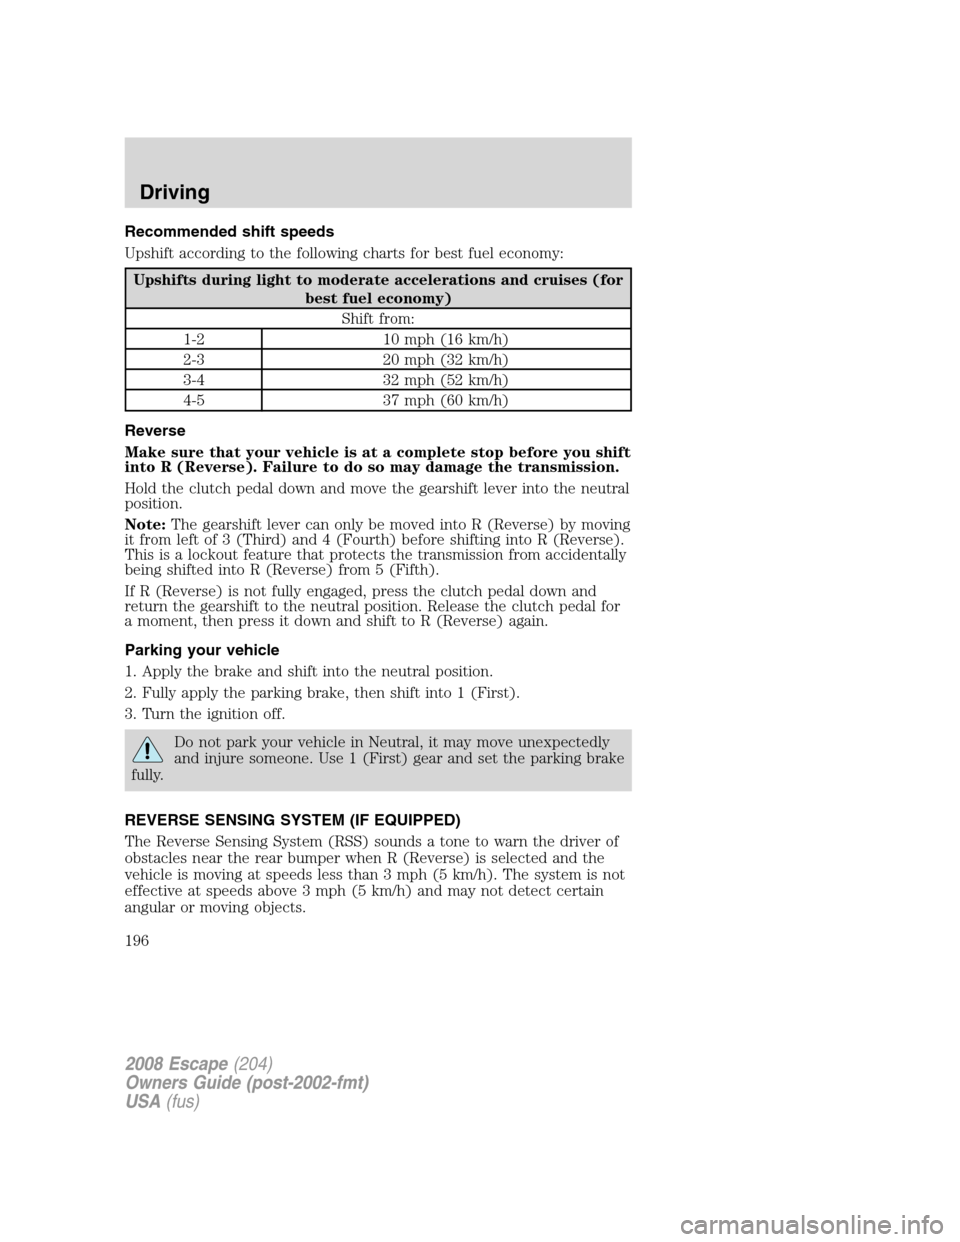 FORD ESCAPE 2008 2.G Owners Manual Recommended shift speeds
Upshift according to the following charts for best fuel economy:
Upshifts during light to moderate accelerations and cruises (for
best fuel economy)
Shift from:
1-2 10 mph (16